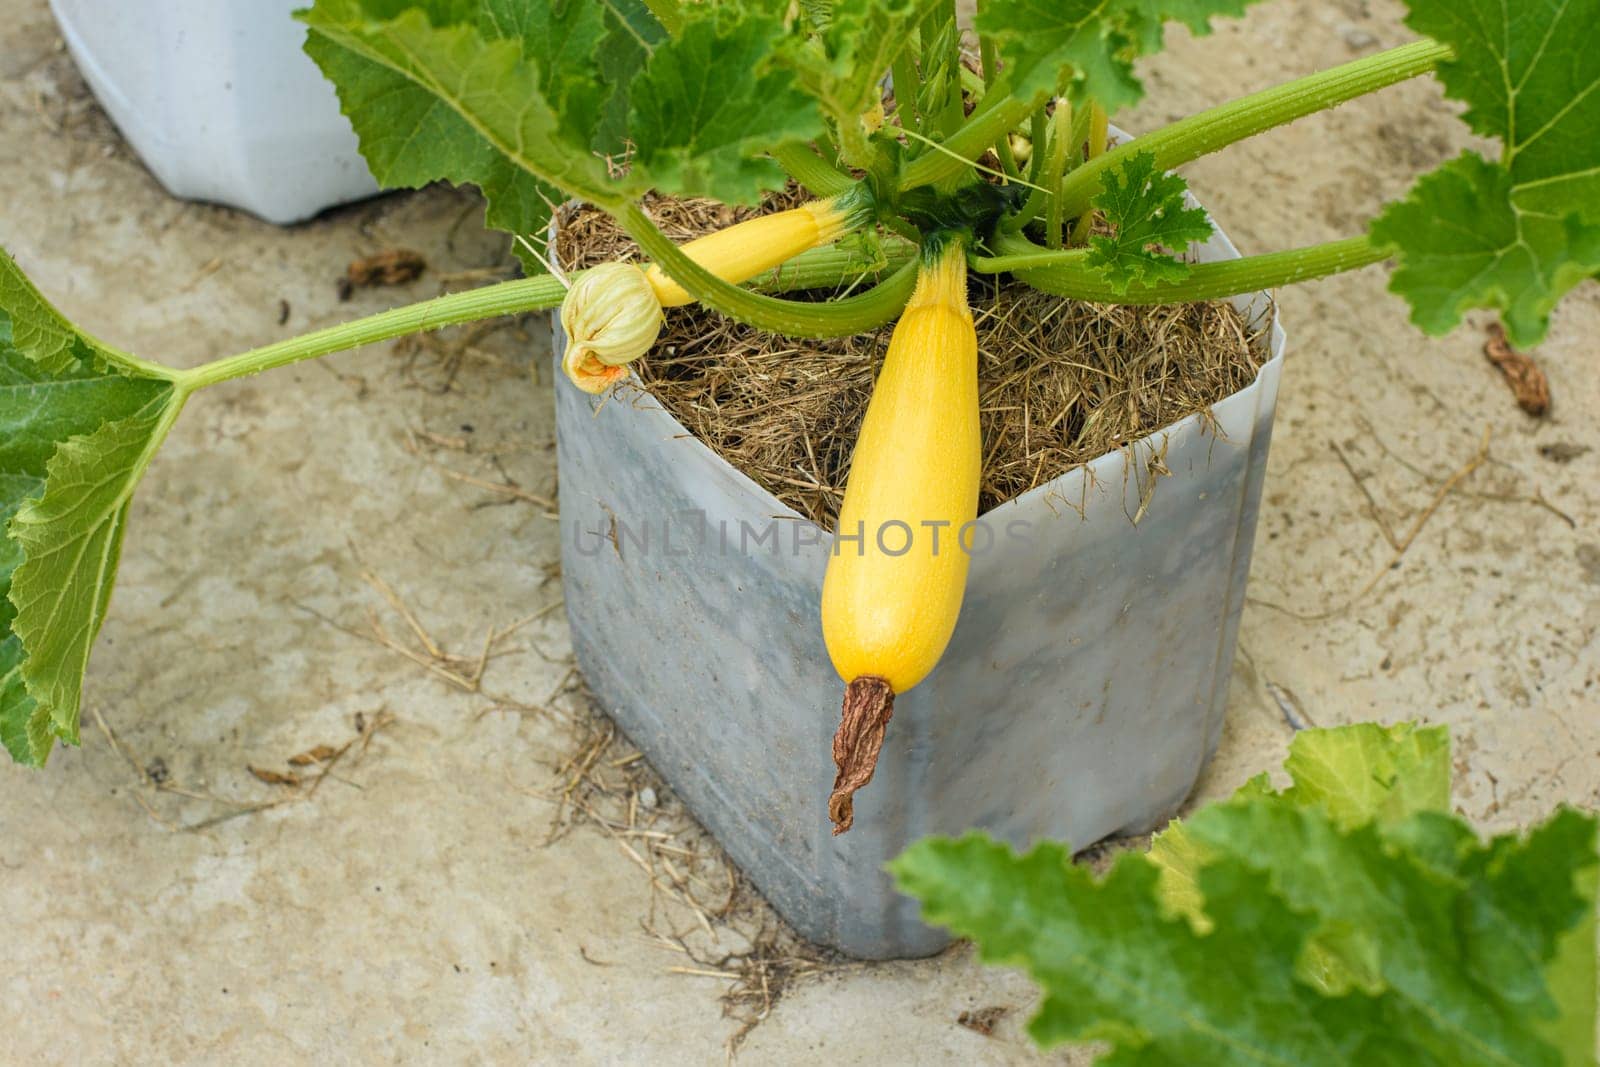 Growing zucchini in plastic pots on concrete by Madhourse